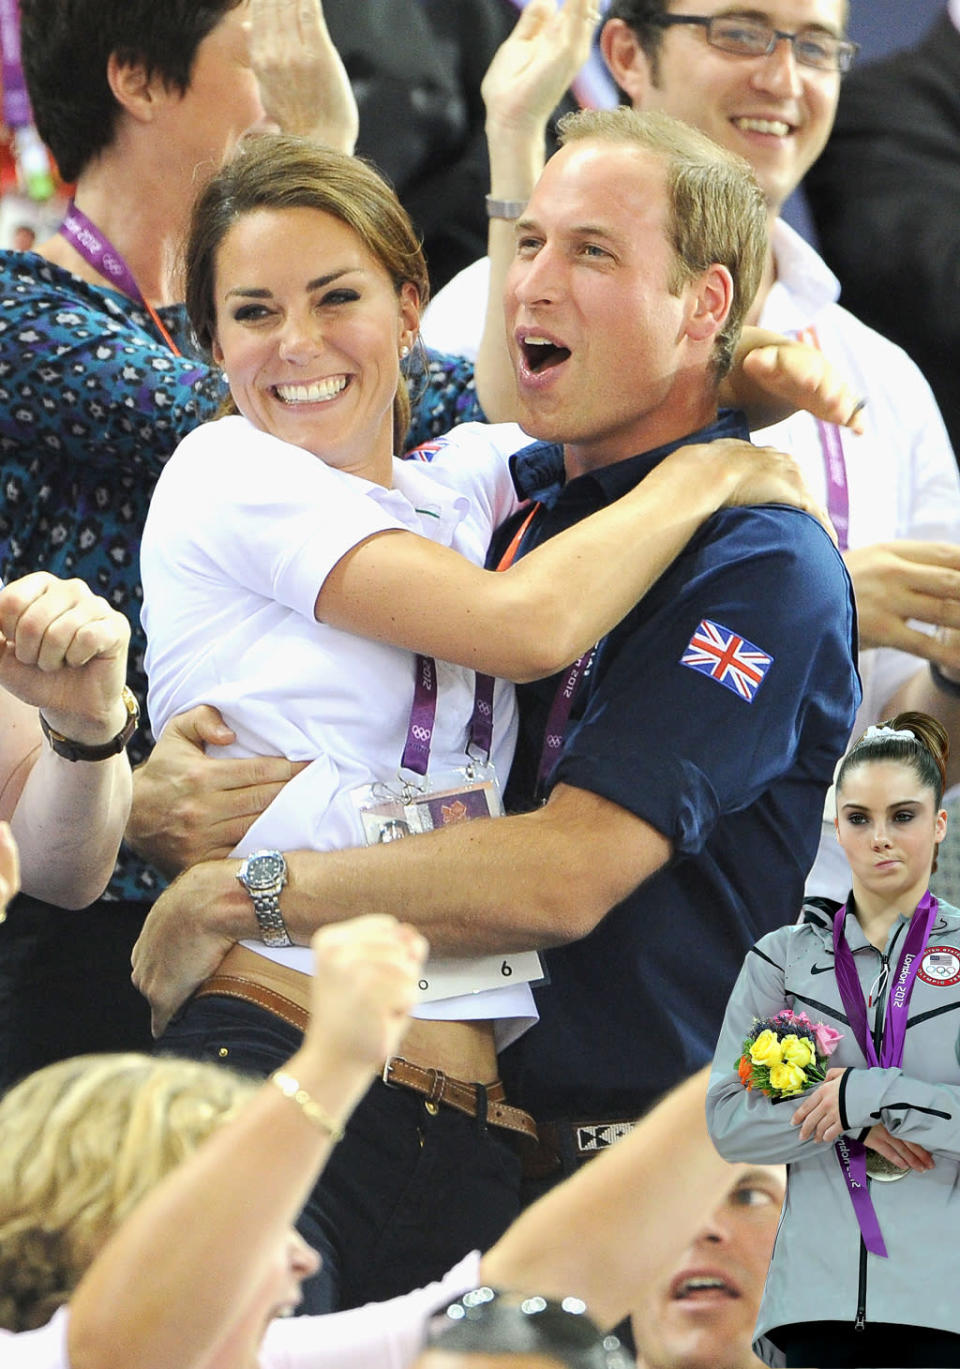 McKayla Maroney is not impressed with Will and Kate's happiness.